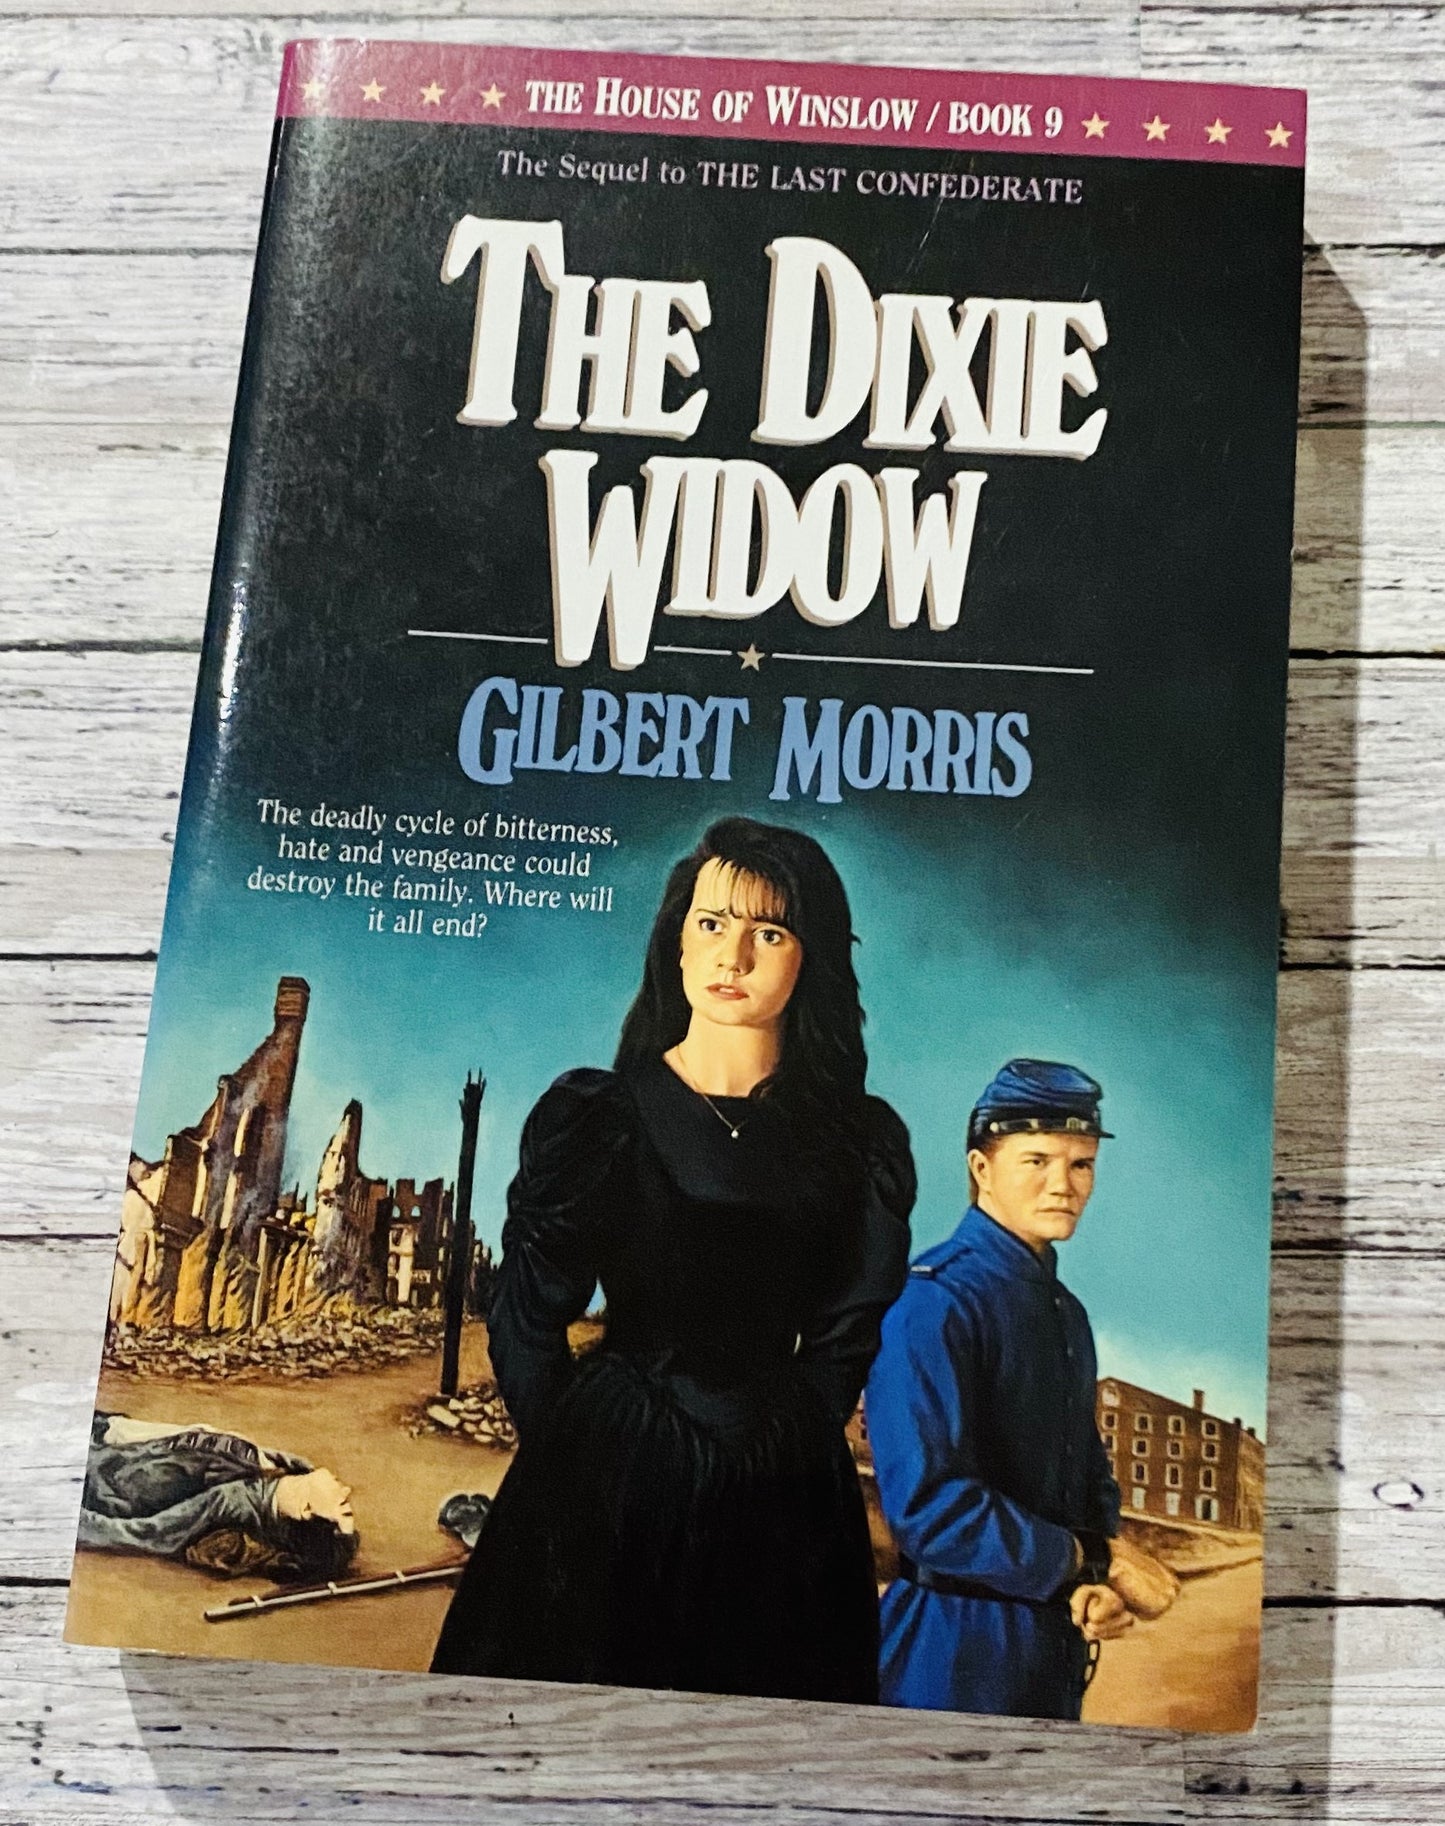 The House of Winslow: The Dixie Widow (Book 9) - Anchored Homeschool Resource Center